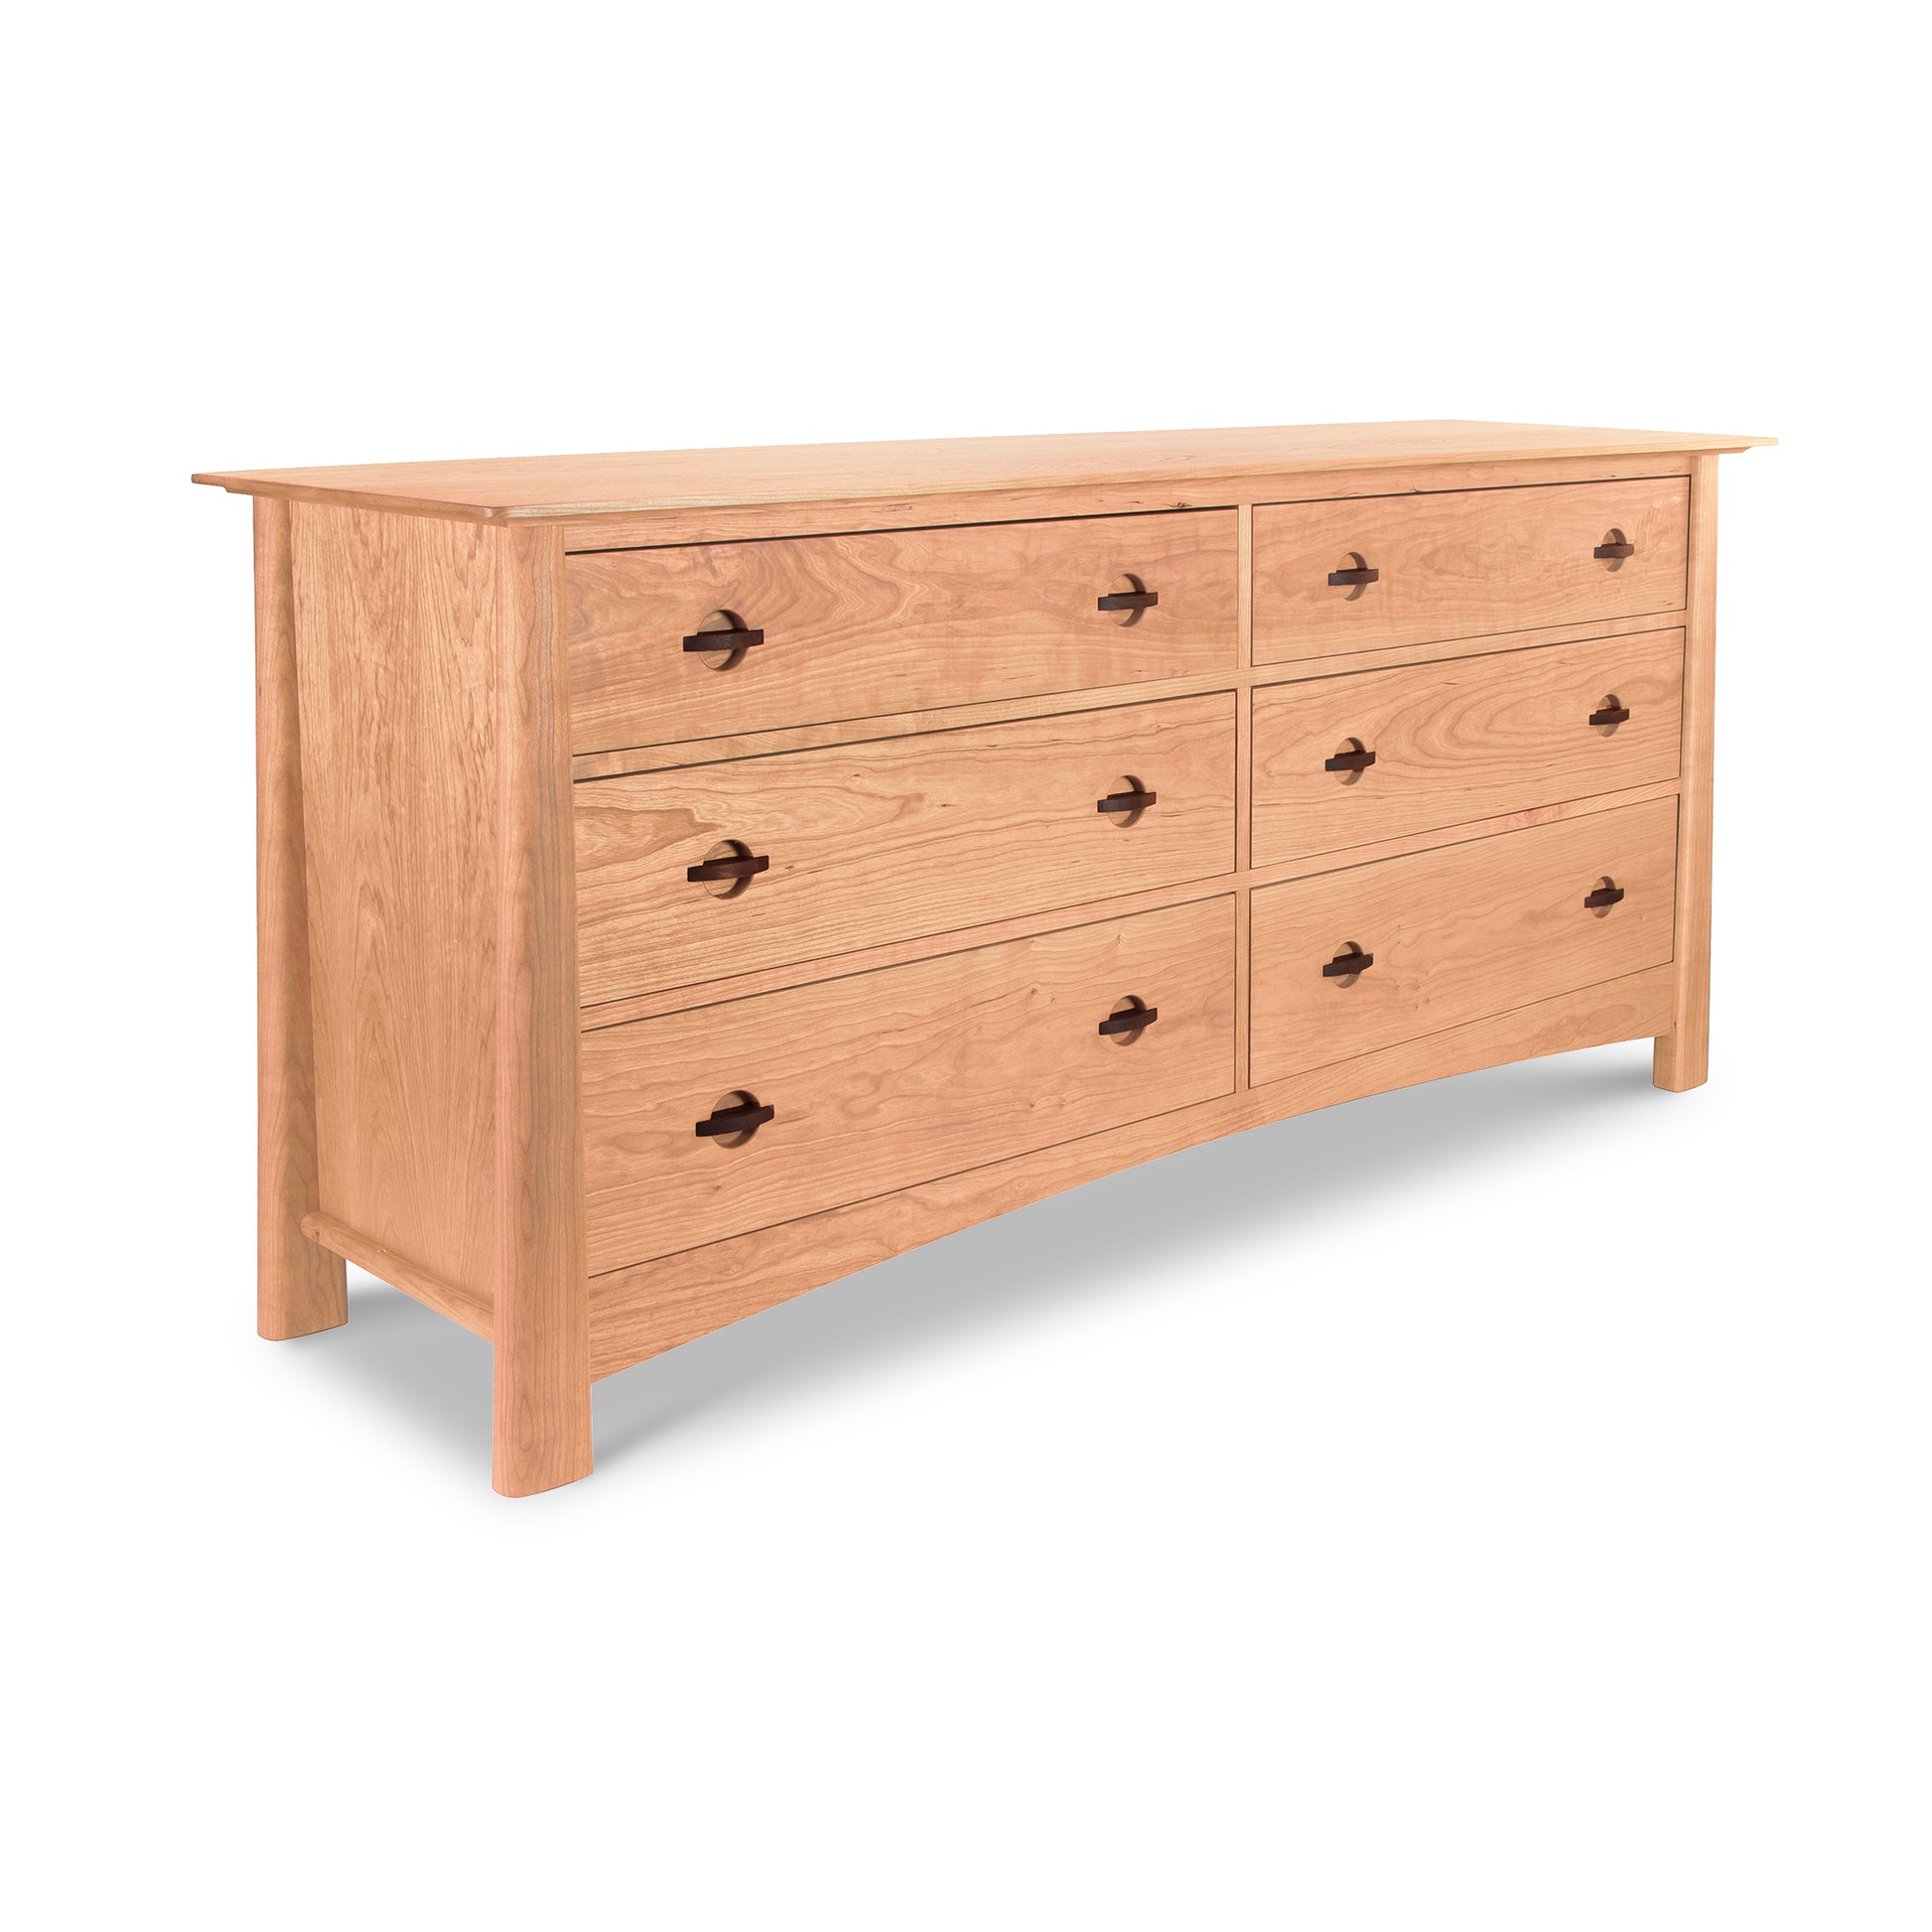 Alt text: Vermont-made Cherry Moon 6-Drawer Dresser by Maple Corner Woodworks, crafted from sustainably harvested solid wood. This American-made furniture piece features six smooth-finish drawers in two rows, with curved edges and dark rectangular handles. The light natural color and elegant design on four short legs make it a perfect addition to any room. Ideal for those seeking high-quality cherry wood furniture or modern dresser options.